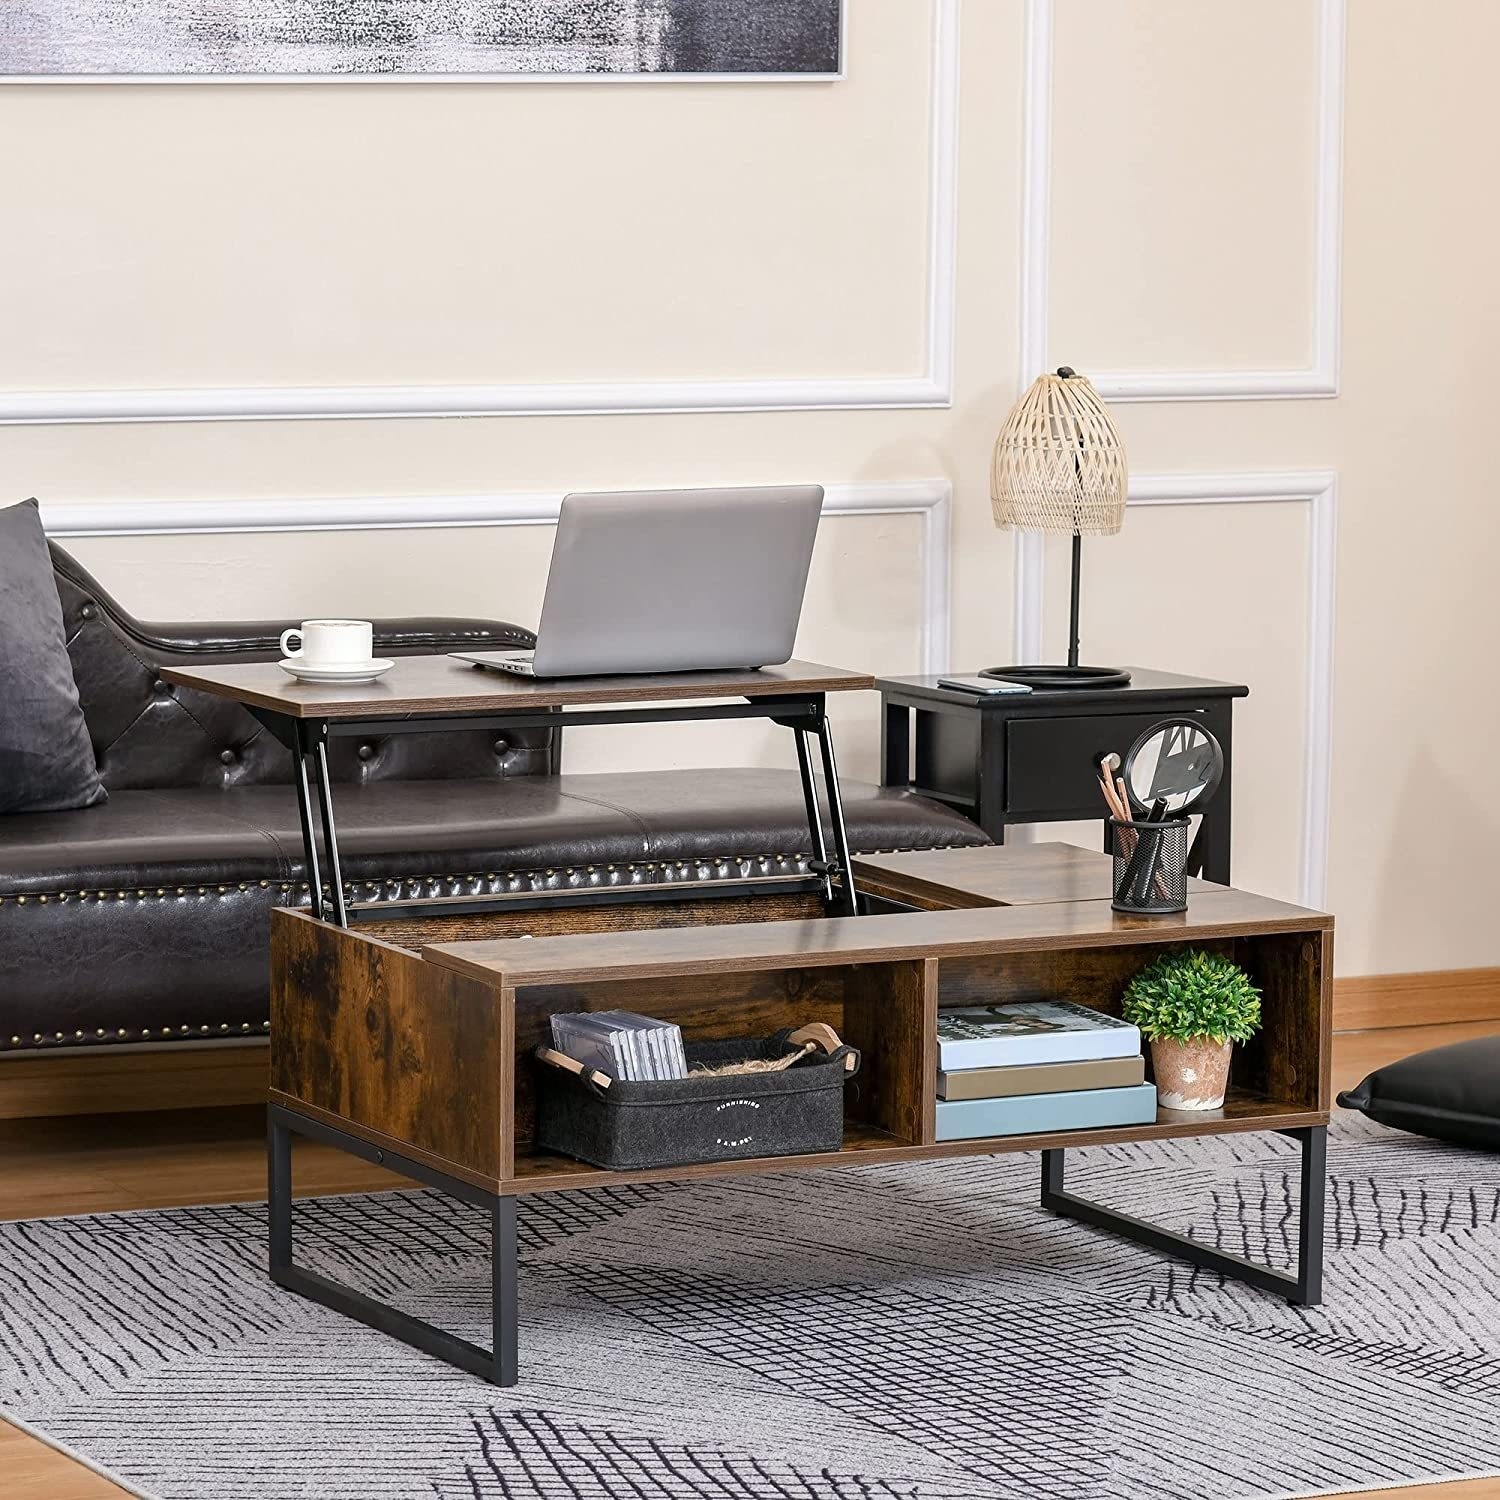 Photo of Dark brown lift top coffee table - ryder